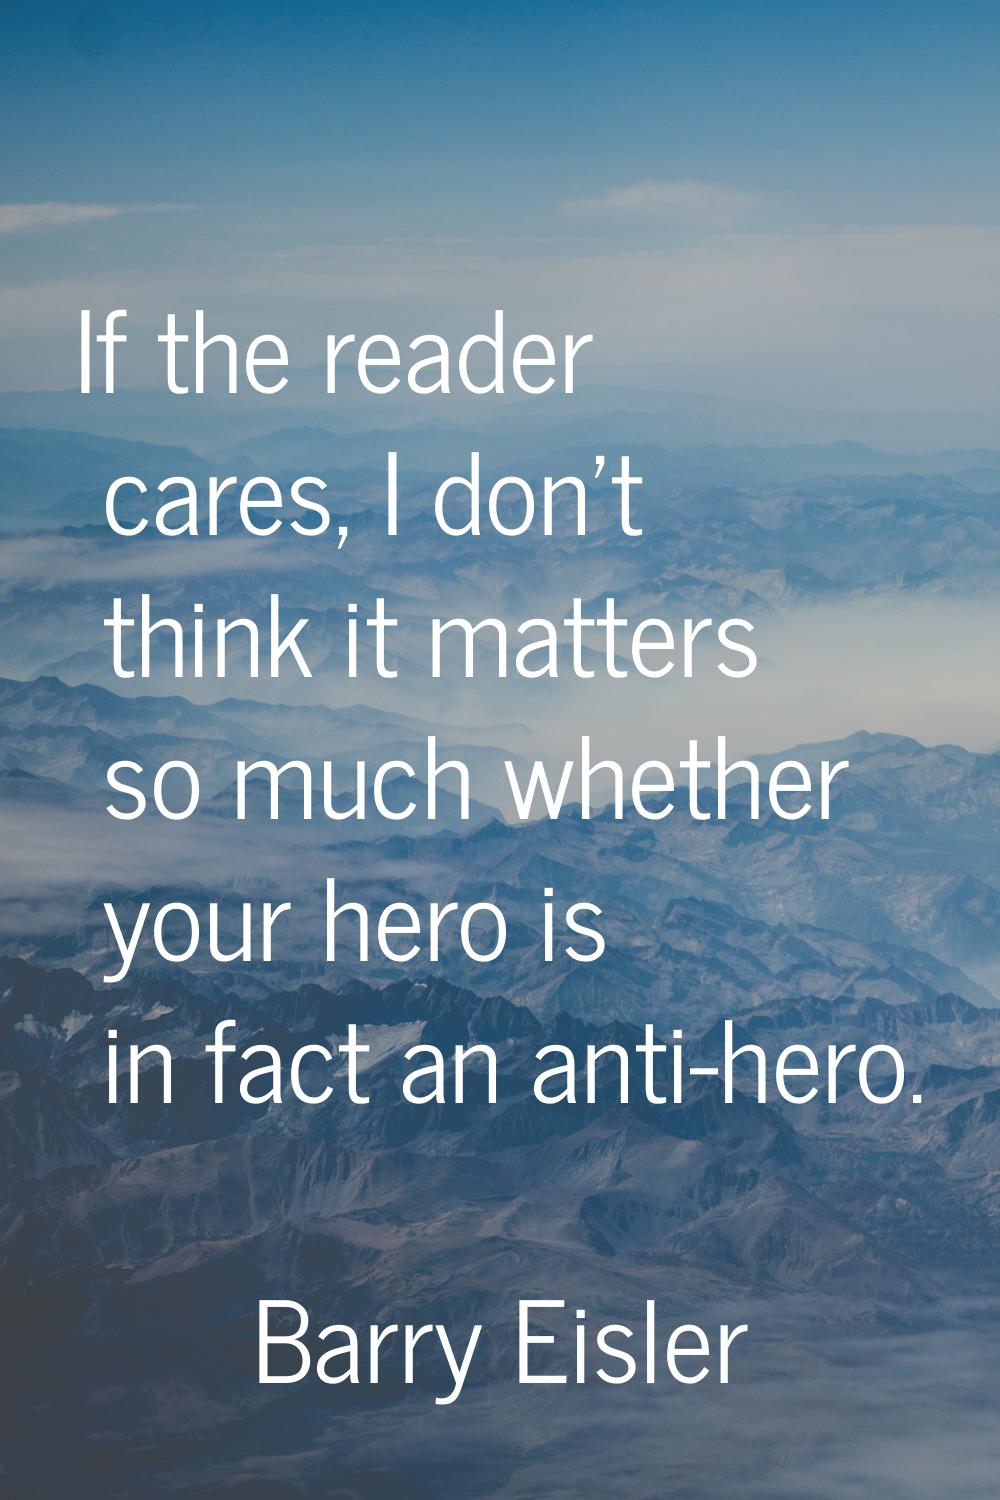 If the reader cares, I don't think it matters so much whether your hero is in fact an anti-hero.